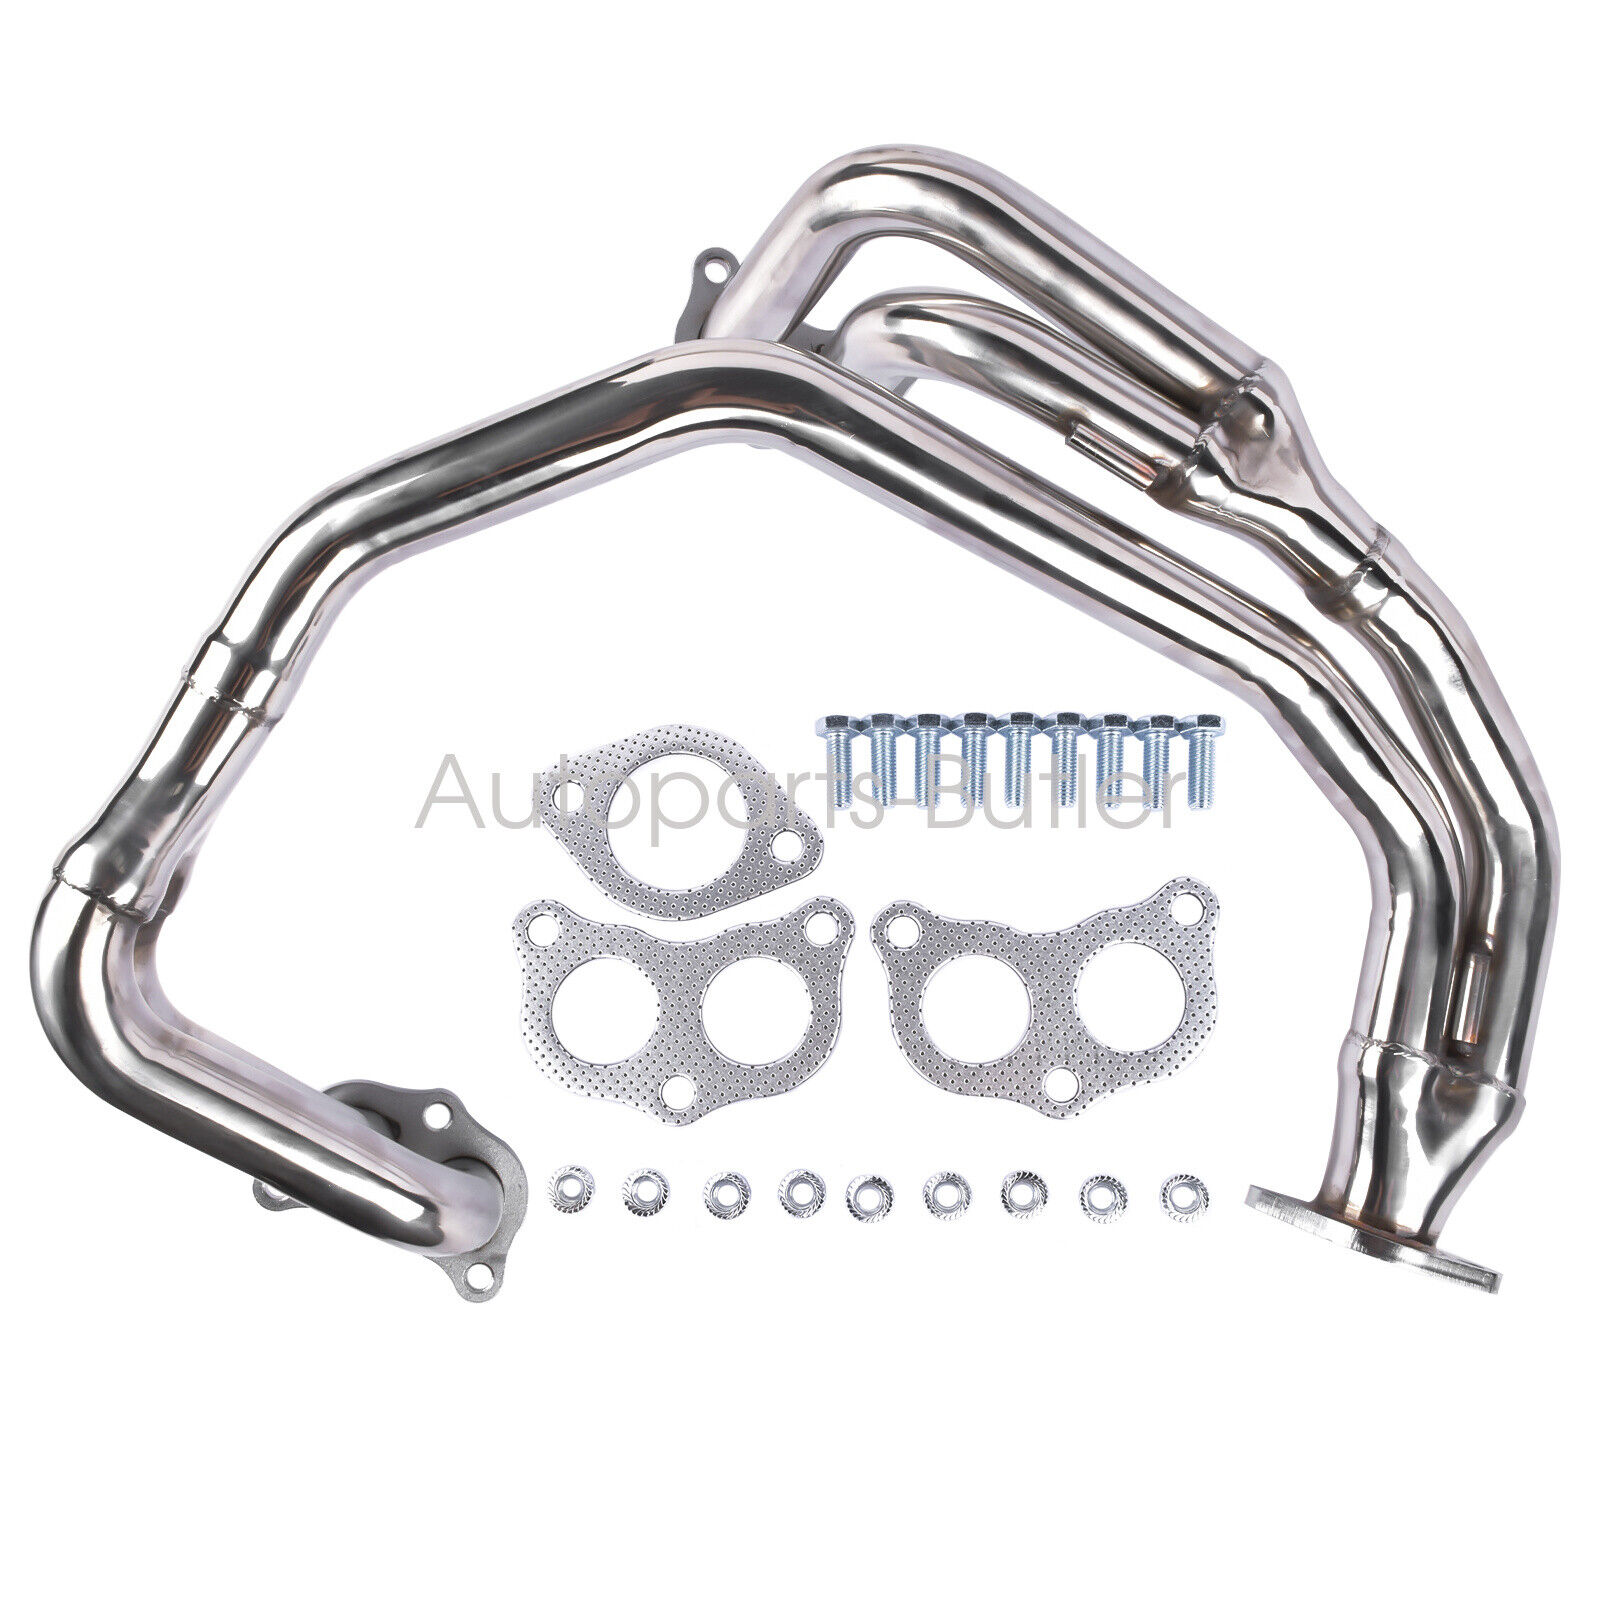 Header Exhaust System w/Gaskets for Subaru Impreza RS 2.5L Non-Turbo 1997-2005